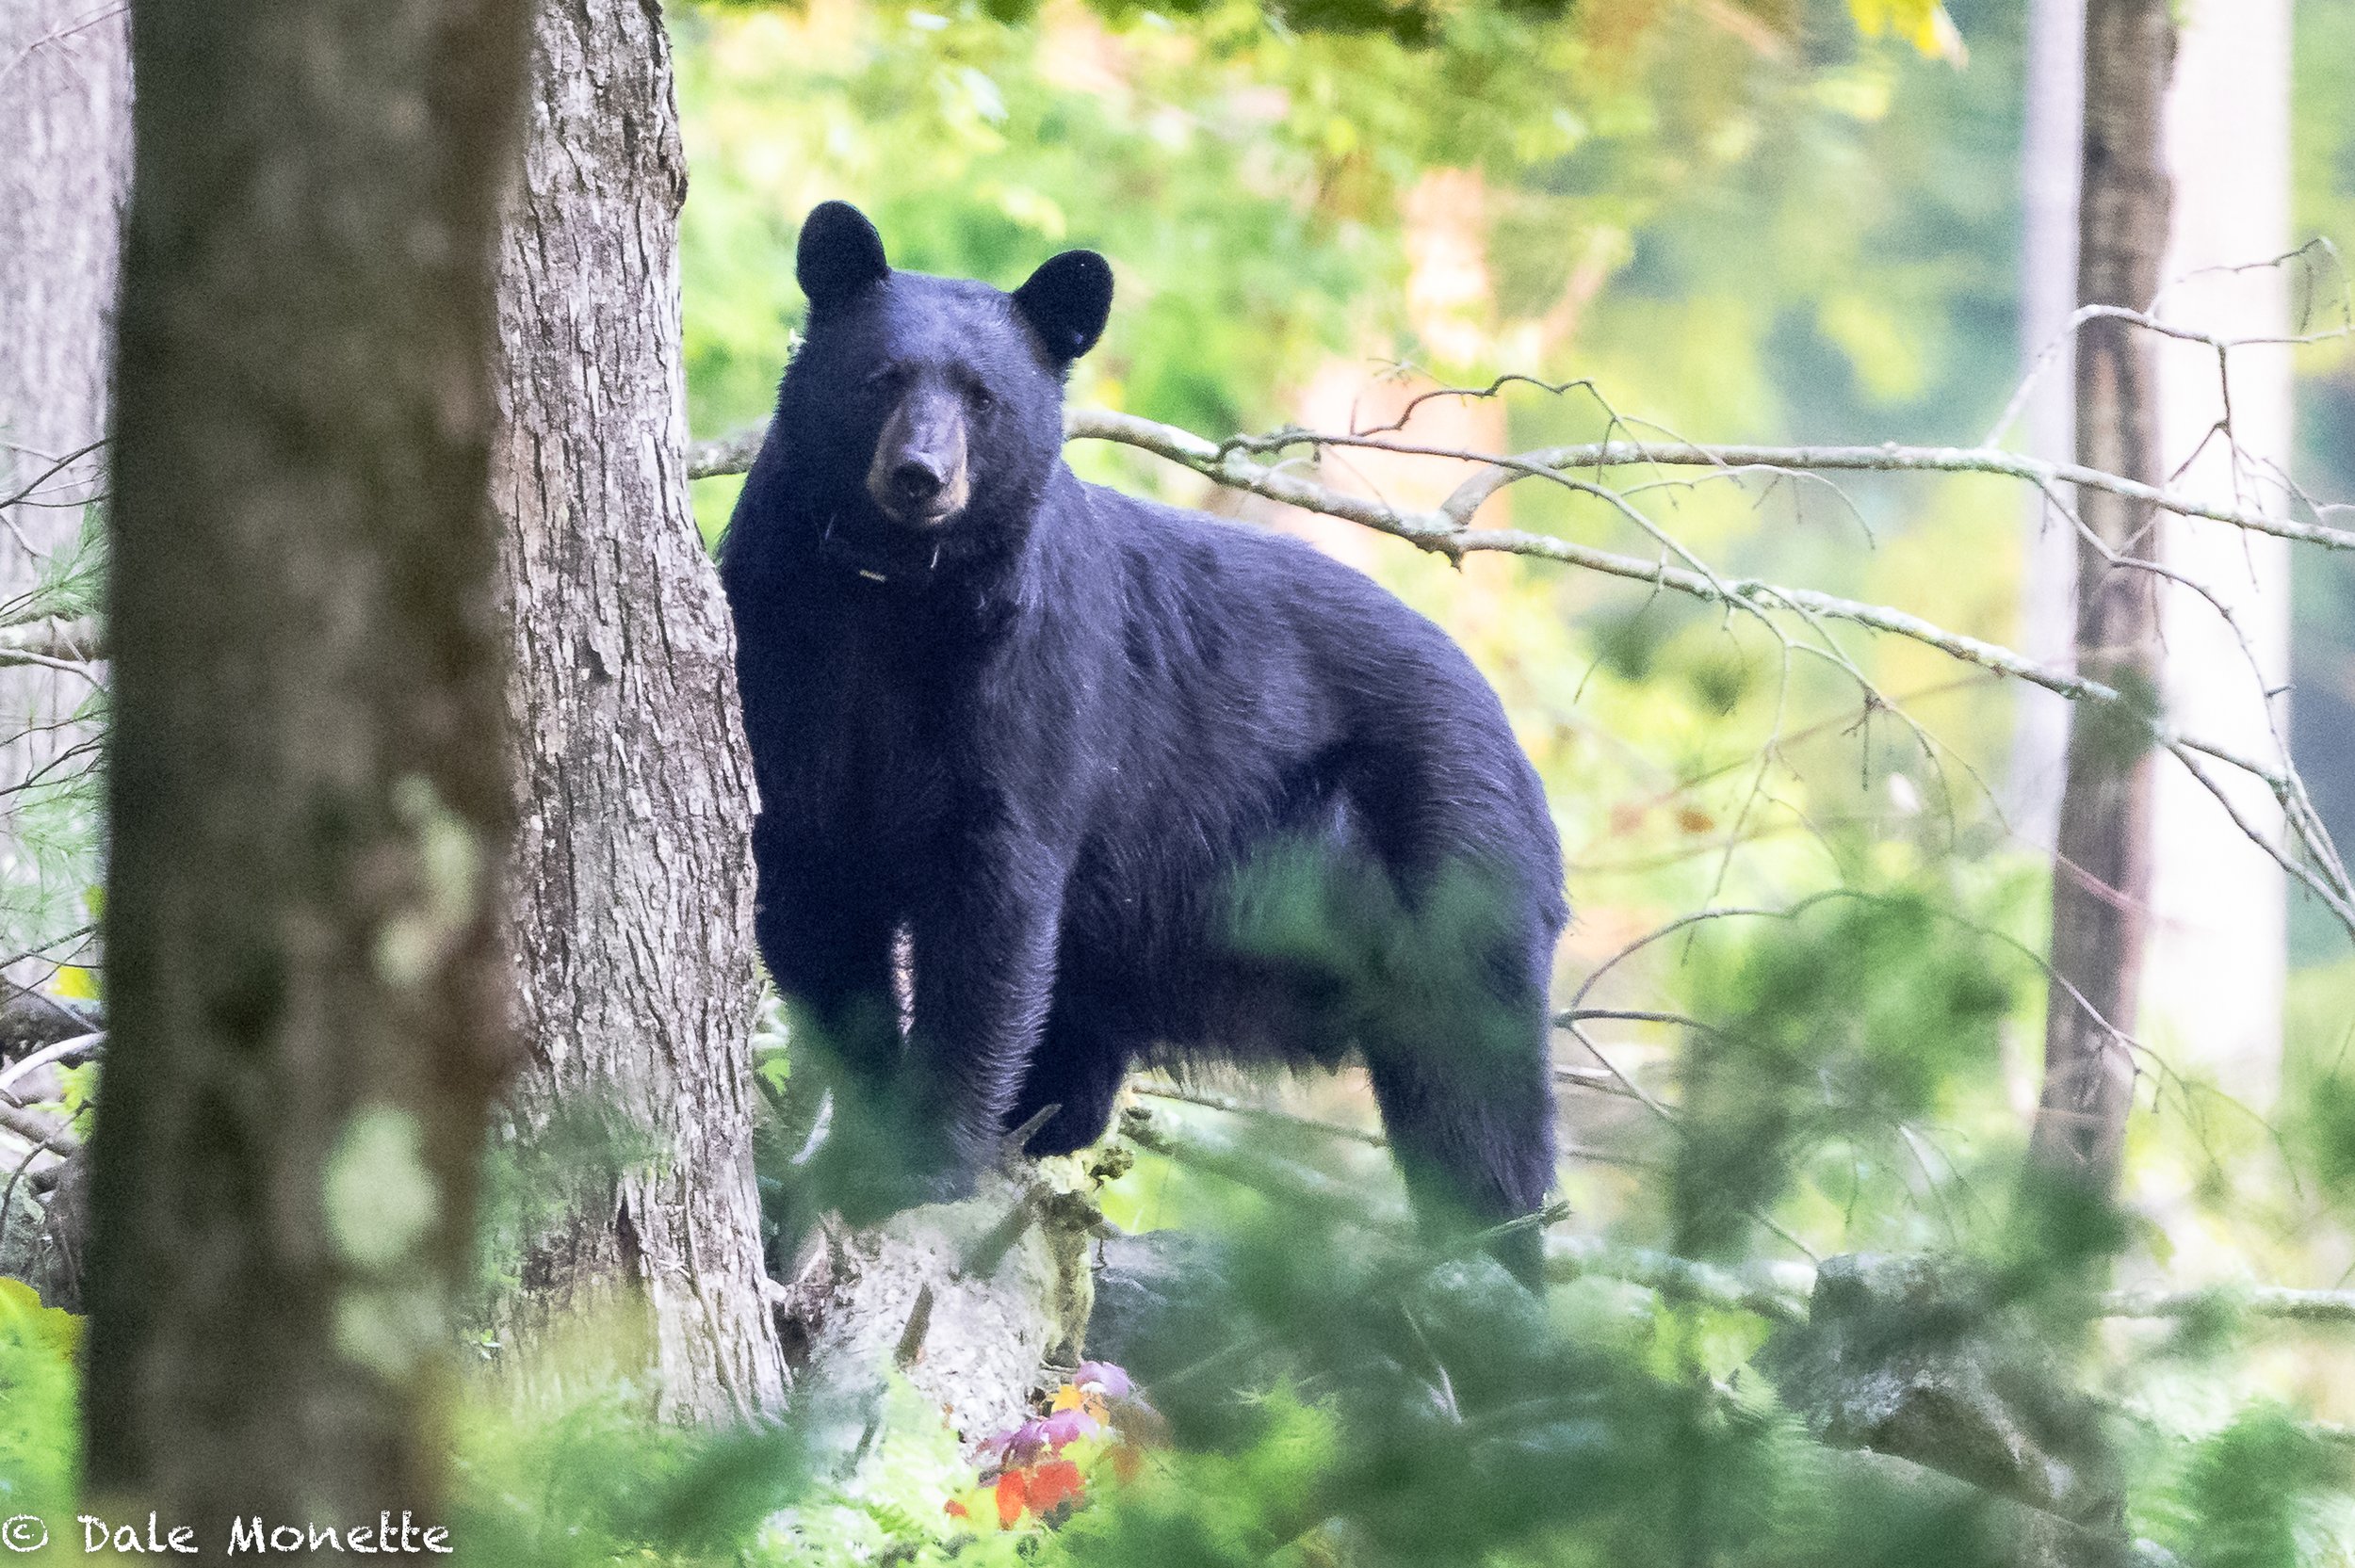   I saw this female bear with 2 cubs tagging along. She was standing up on her hind legs looking at me when I spotted her watching me.    She has a radio collar on from MassWildlife used to follow her.  